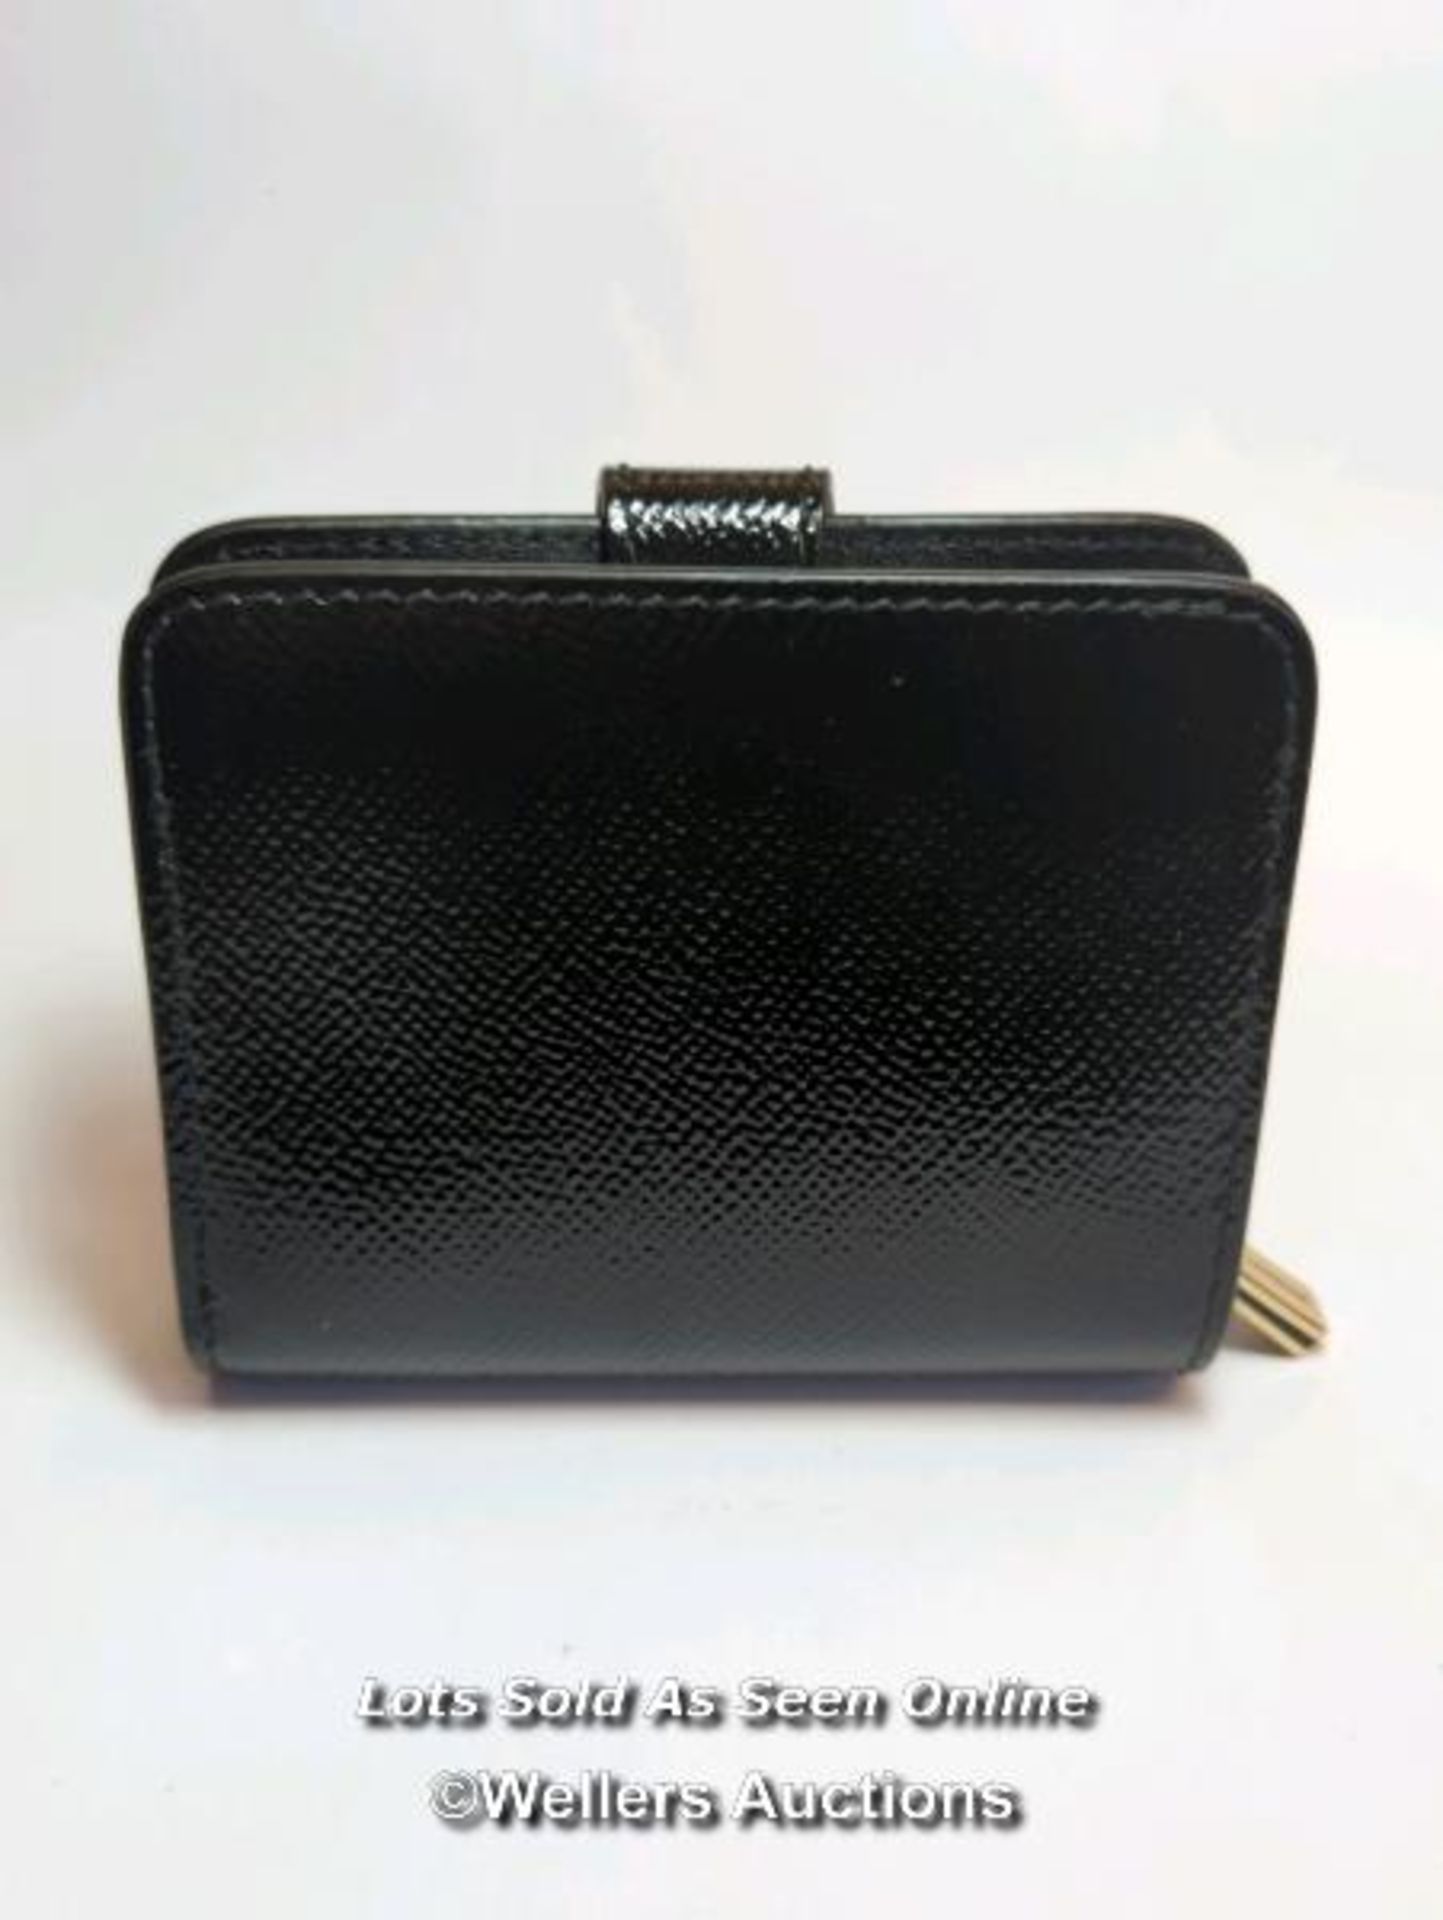 Burberry purse, new / SF - Image 5 of 11